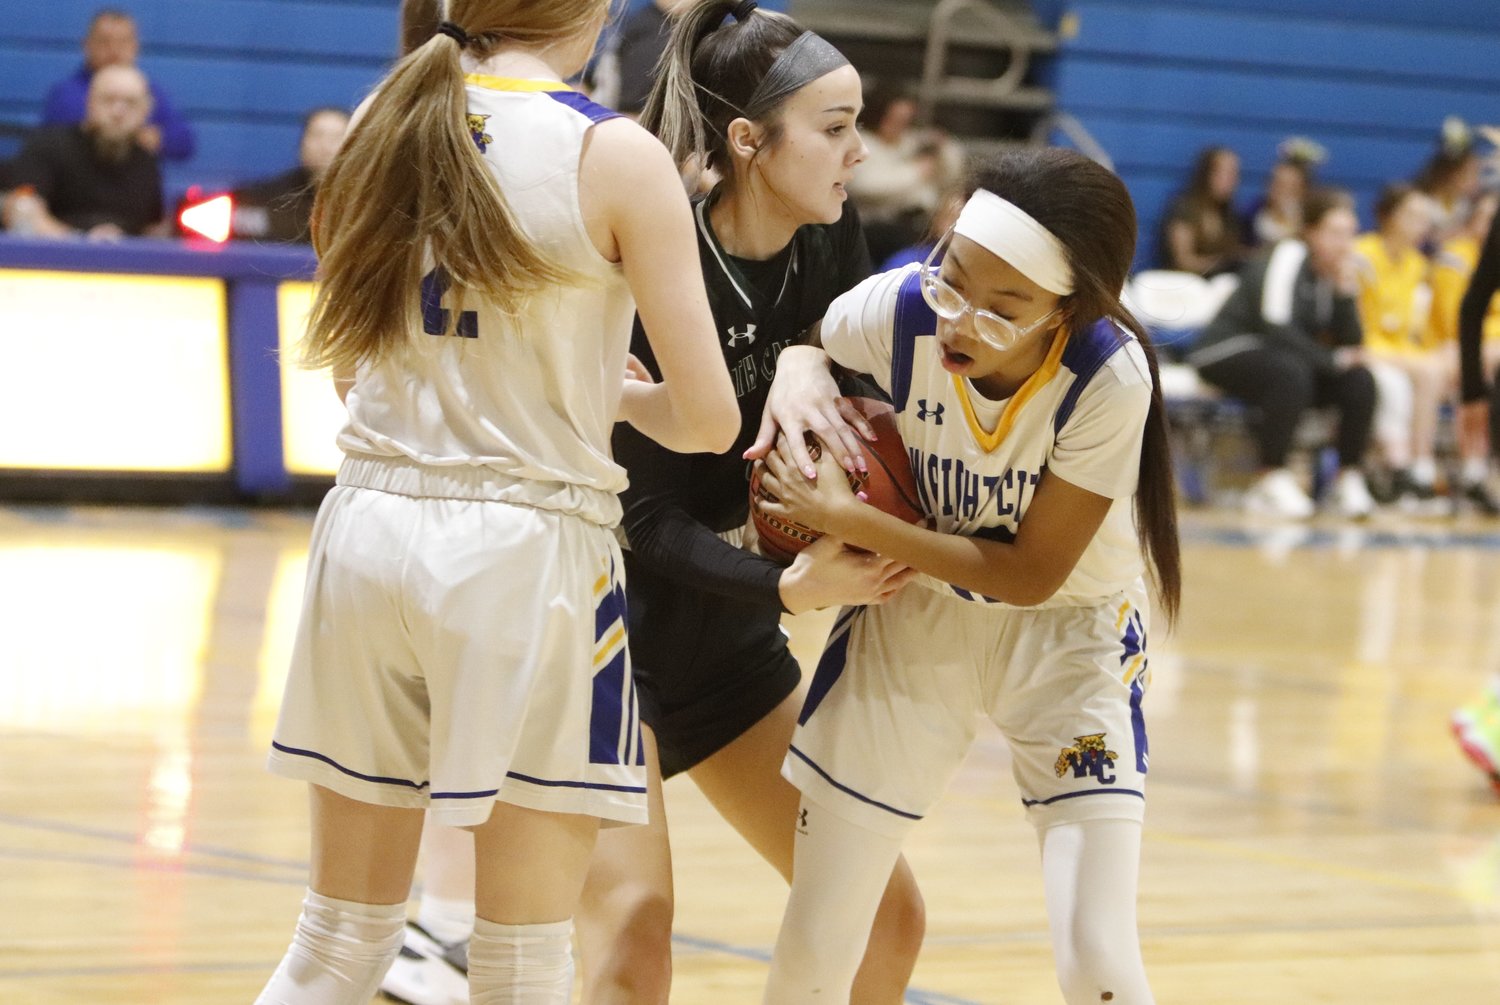 Danika Graham (right) battles for possession of the ball during Monday night's game.